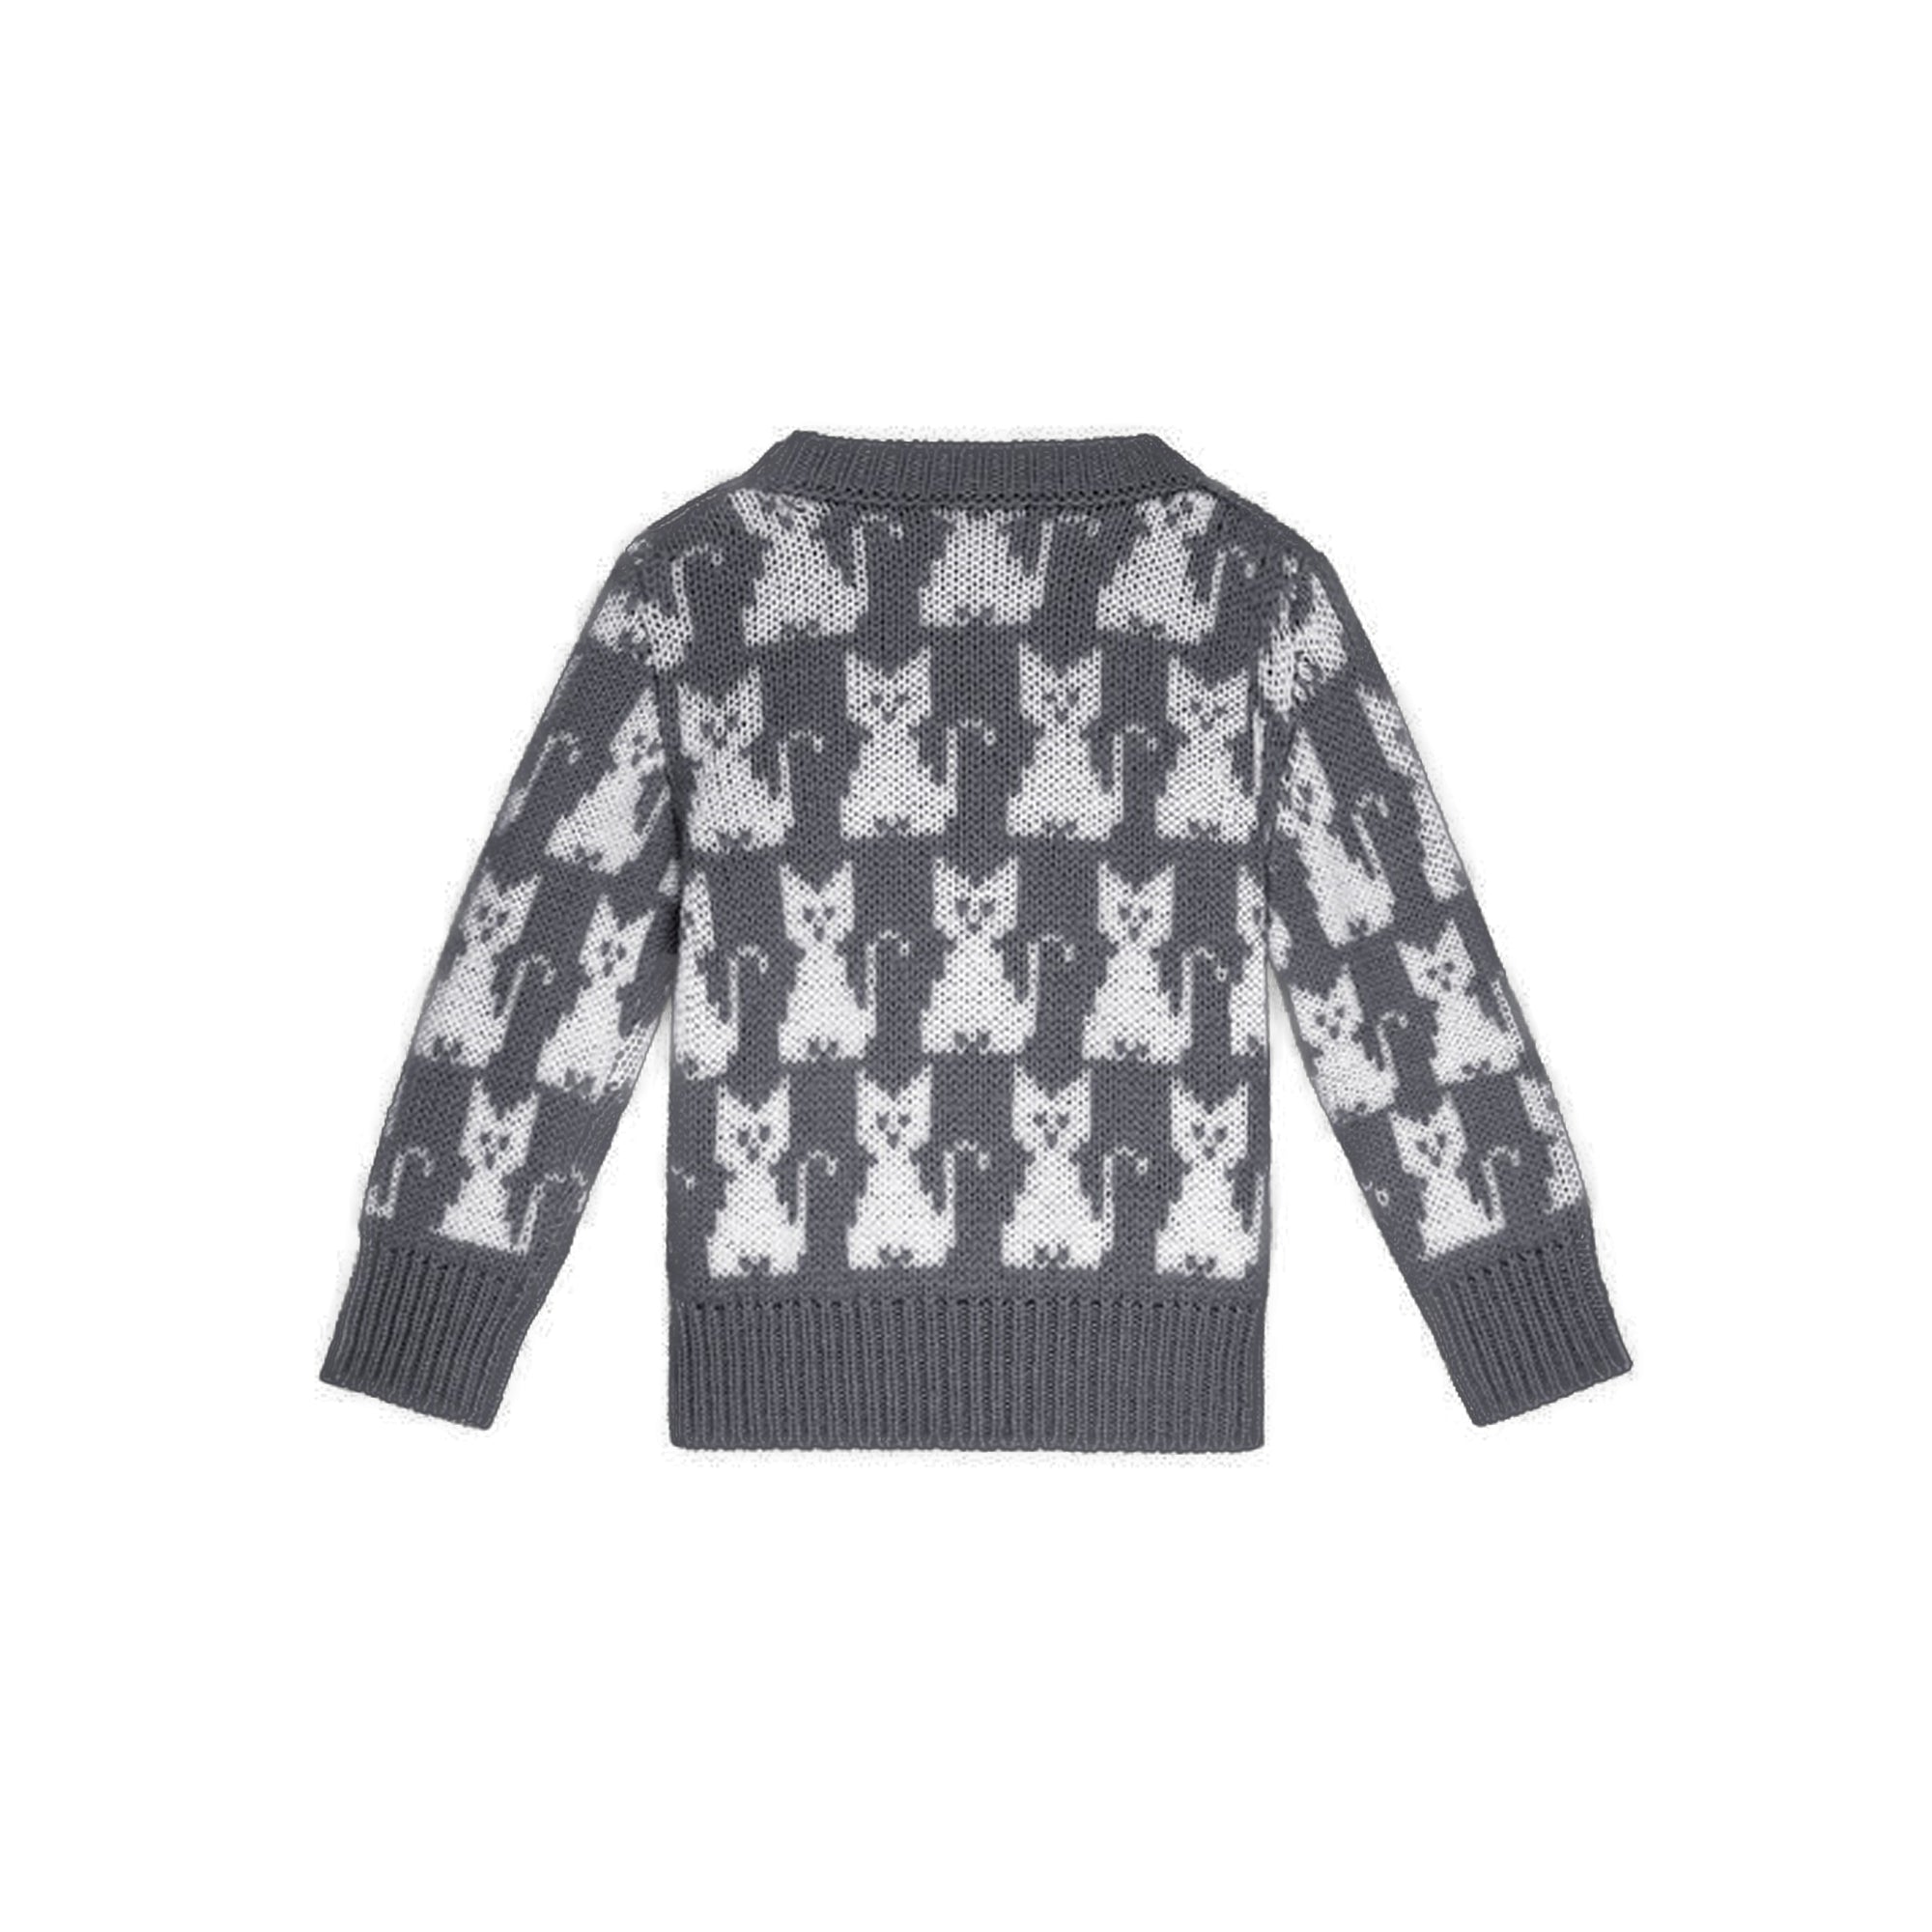 Baby "MAGLIA TRICOT" Wool Sweater